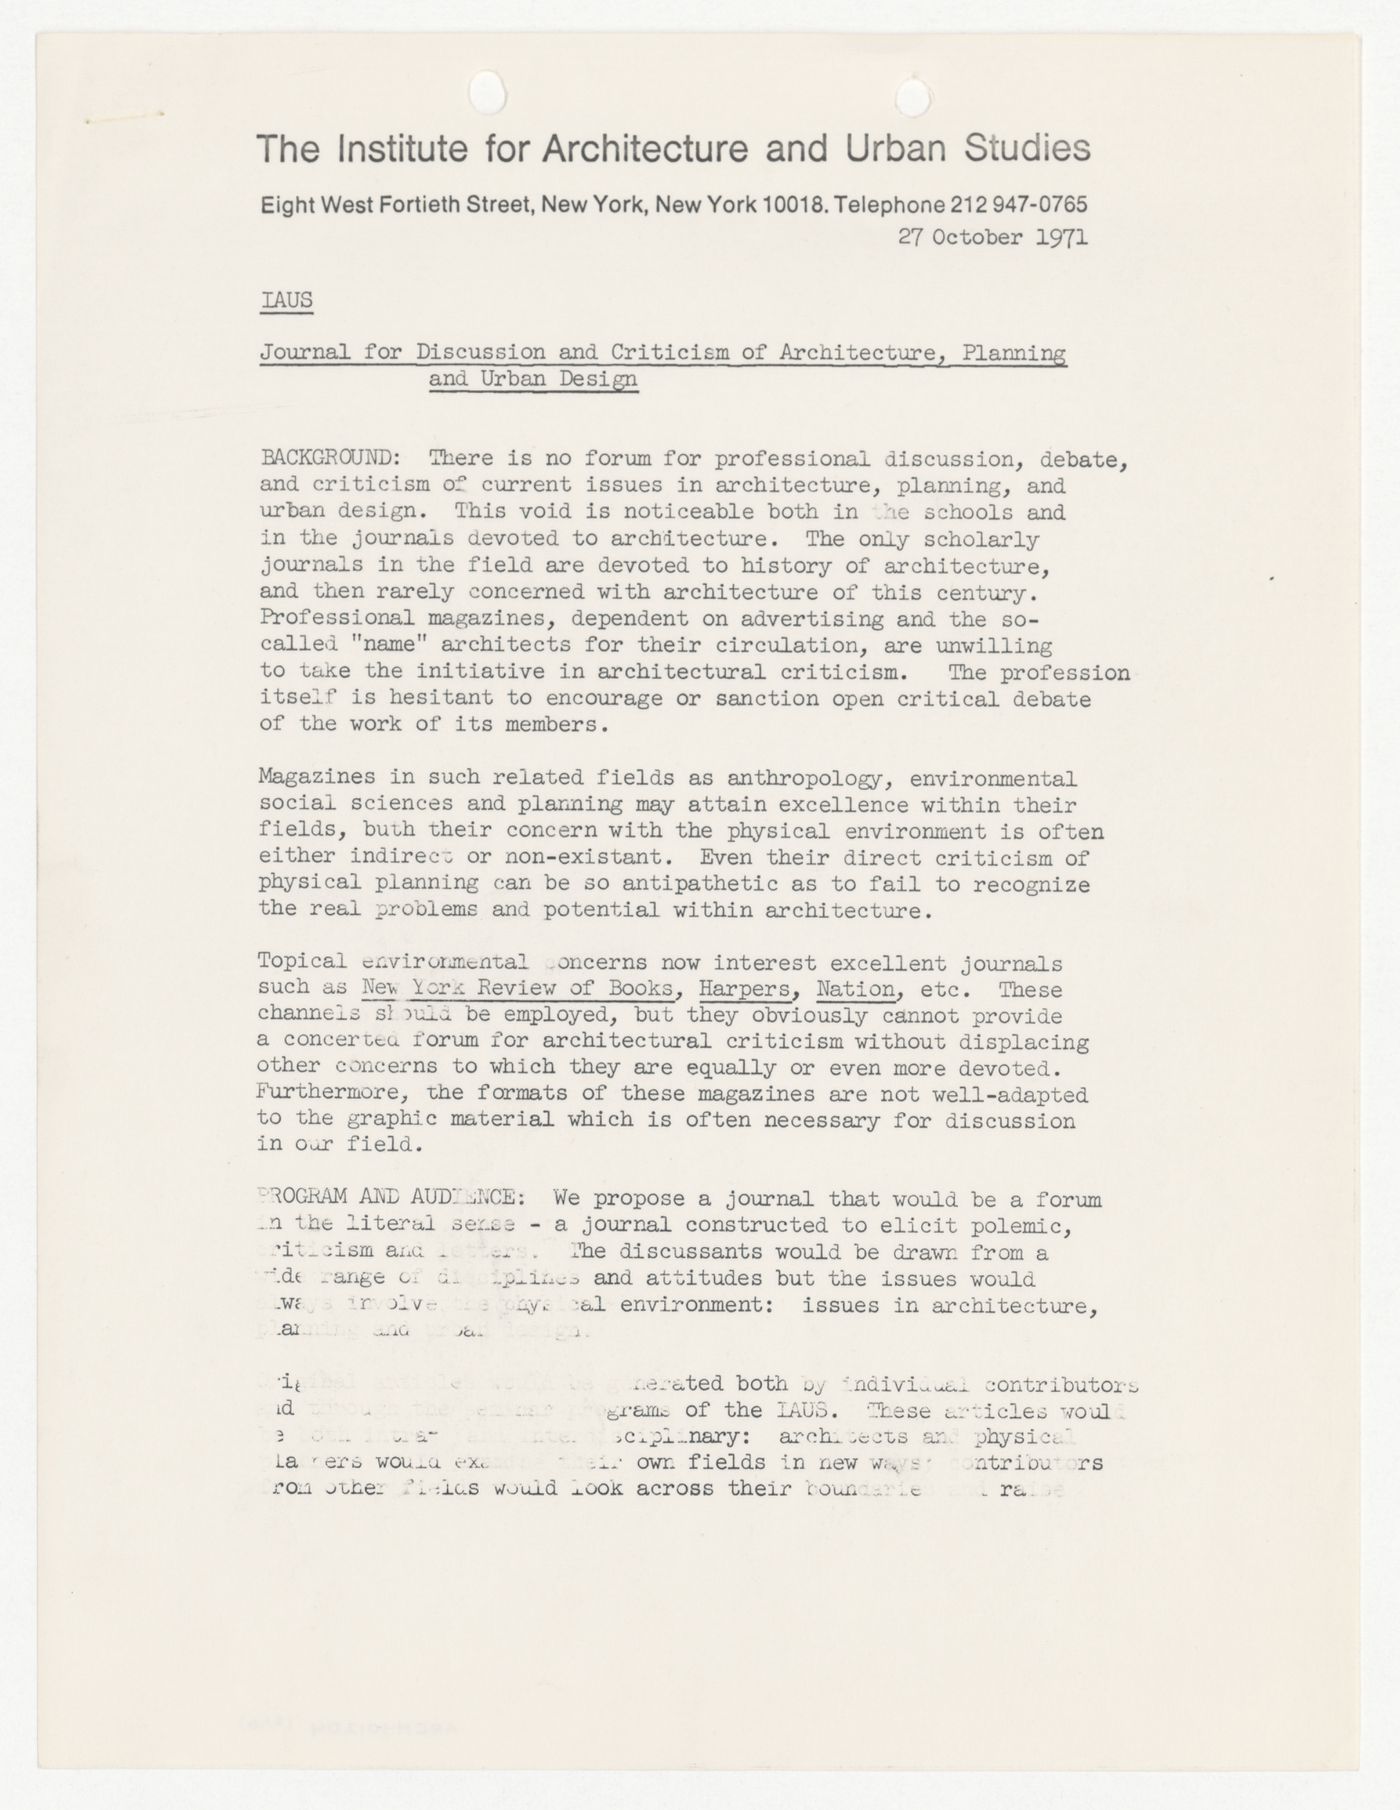 Memorandum from Stanford Anderson and Anthony Vidler to the Fellows with attached revised proposal for a magazine